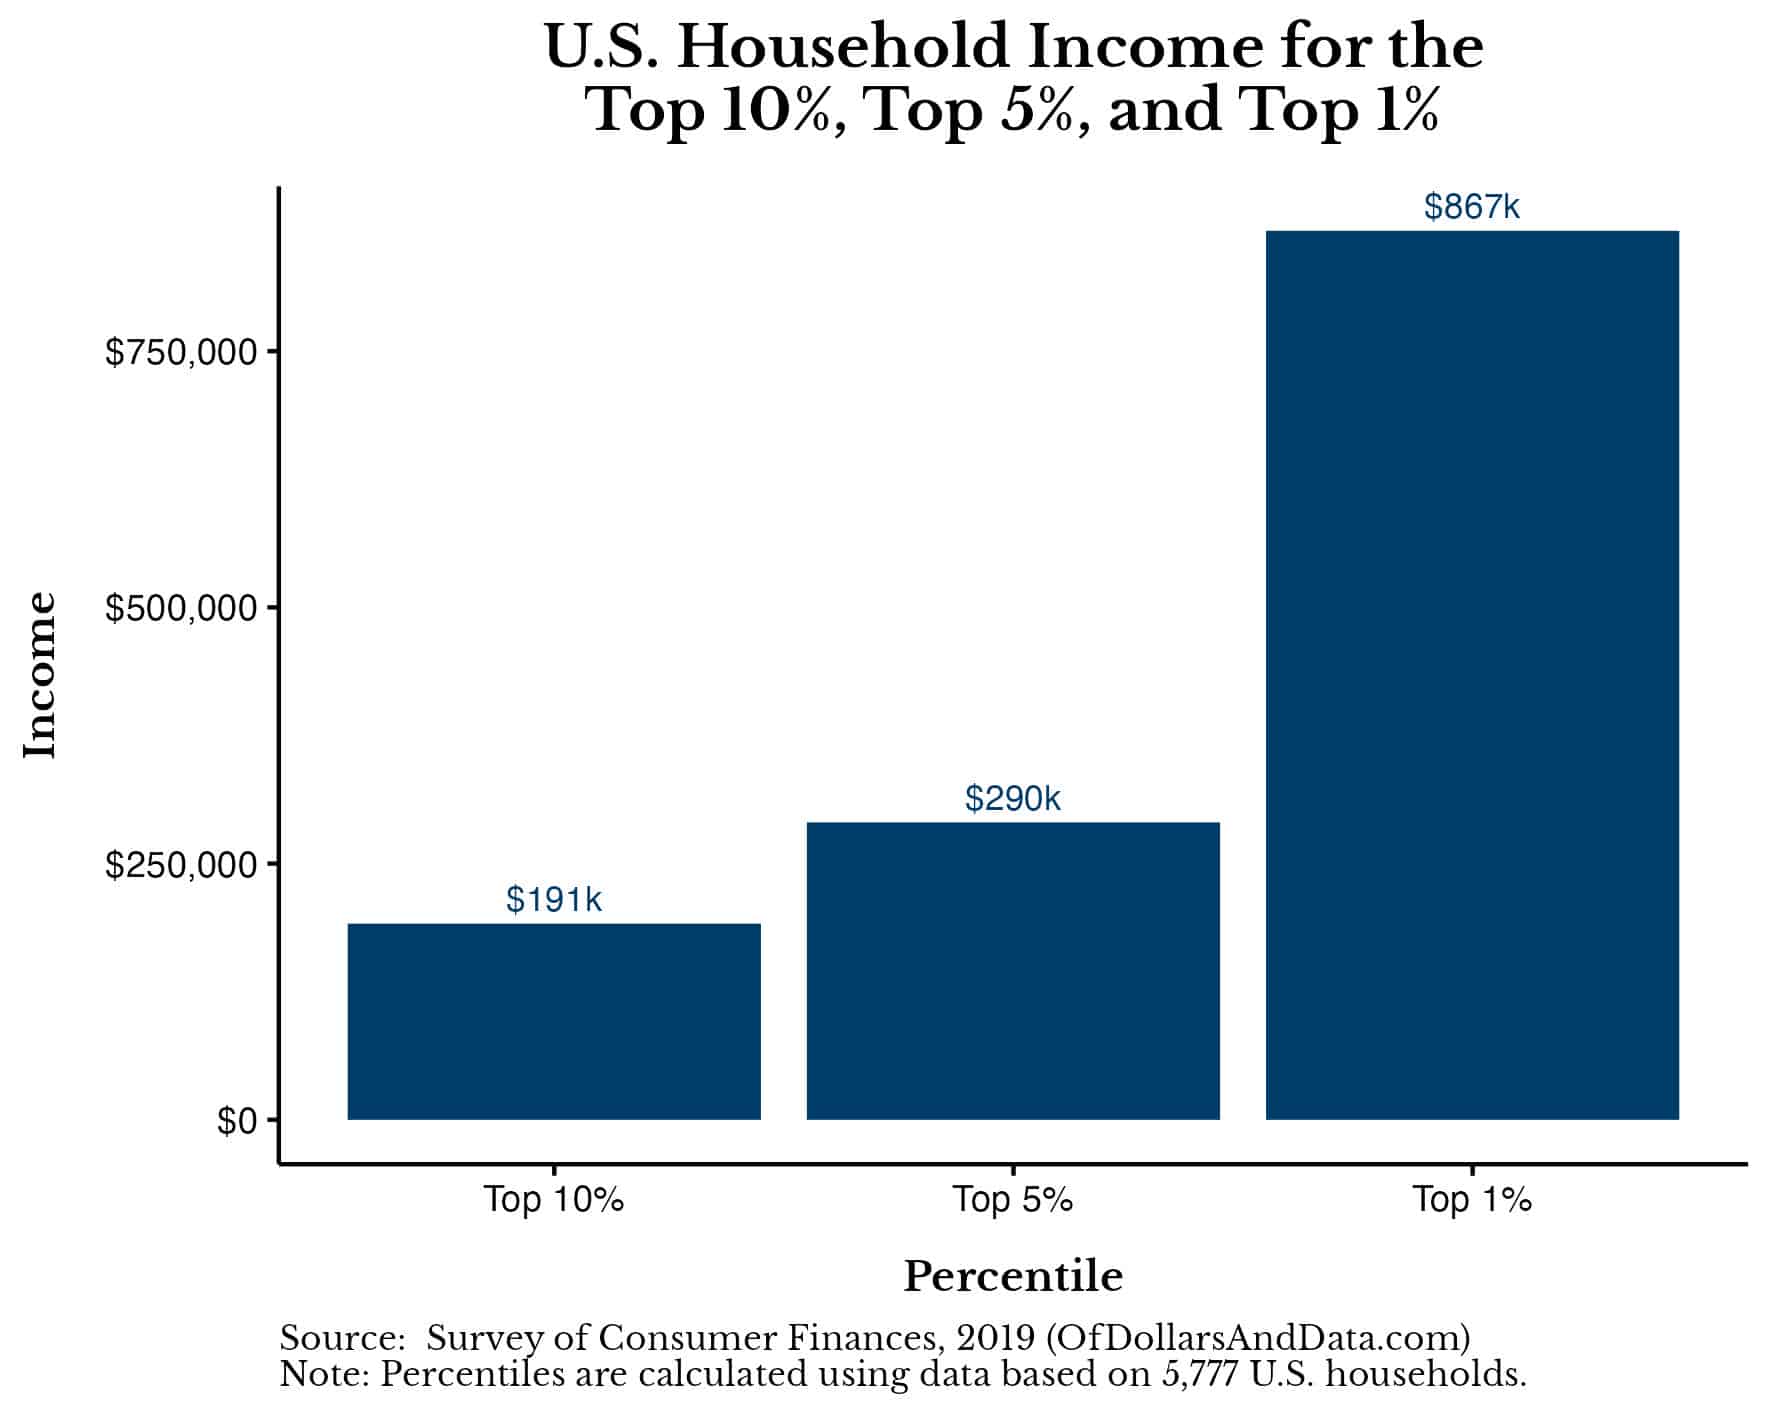 Chart showing the U.S. household income for the top 10%, top 5%, and top 1% of households from the Survey of Consumer Finances 2019 data. This level of income would be considered rich in the rich vs wealthy debate.